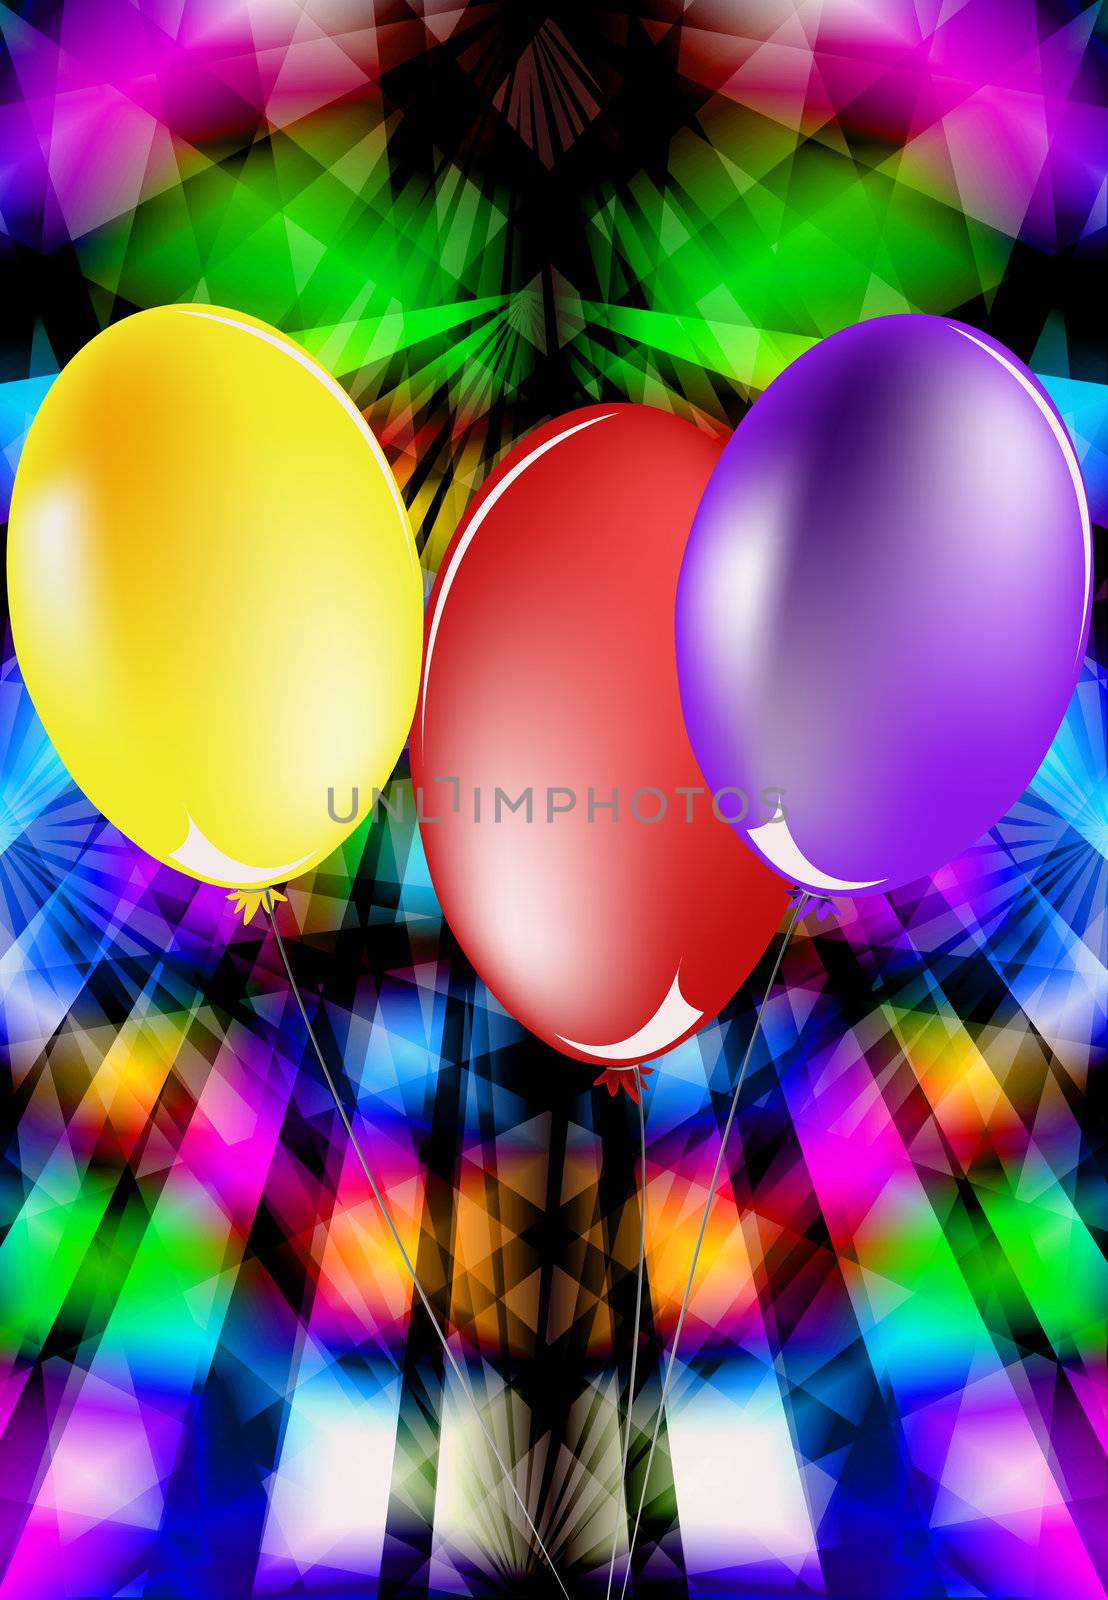 Abstract celebratory illustration with balloons for placing of your text